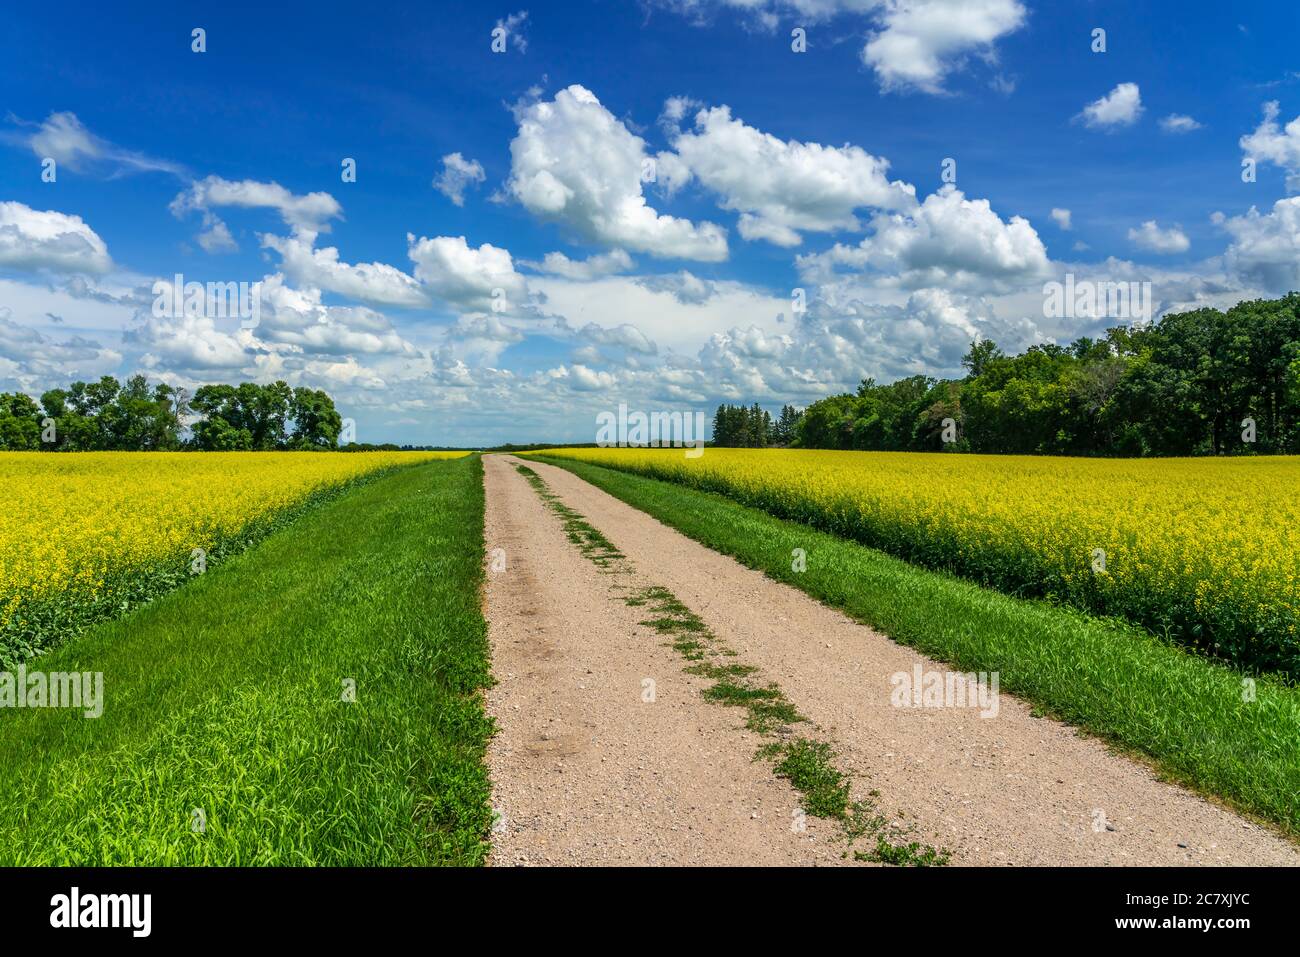 A blooming yellow canola field near Winkler, Manitoba, Canada. Stock Photo